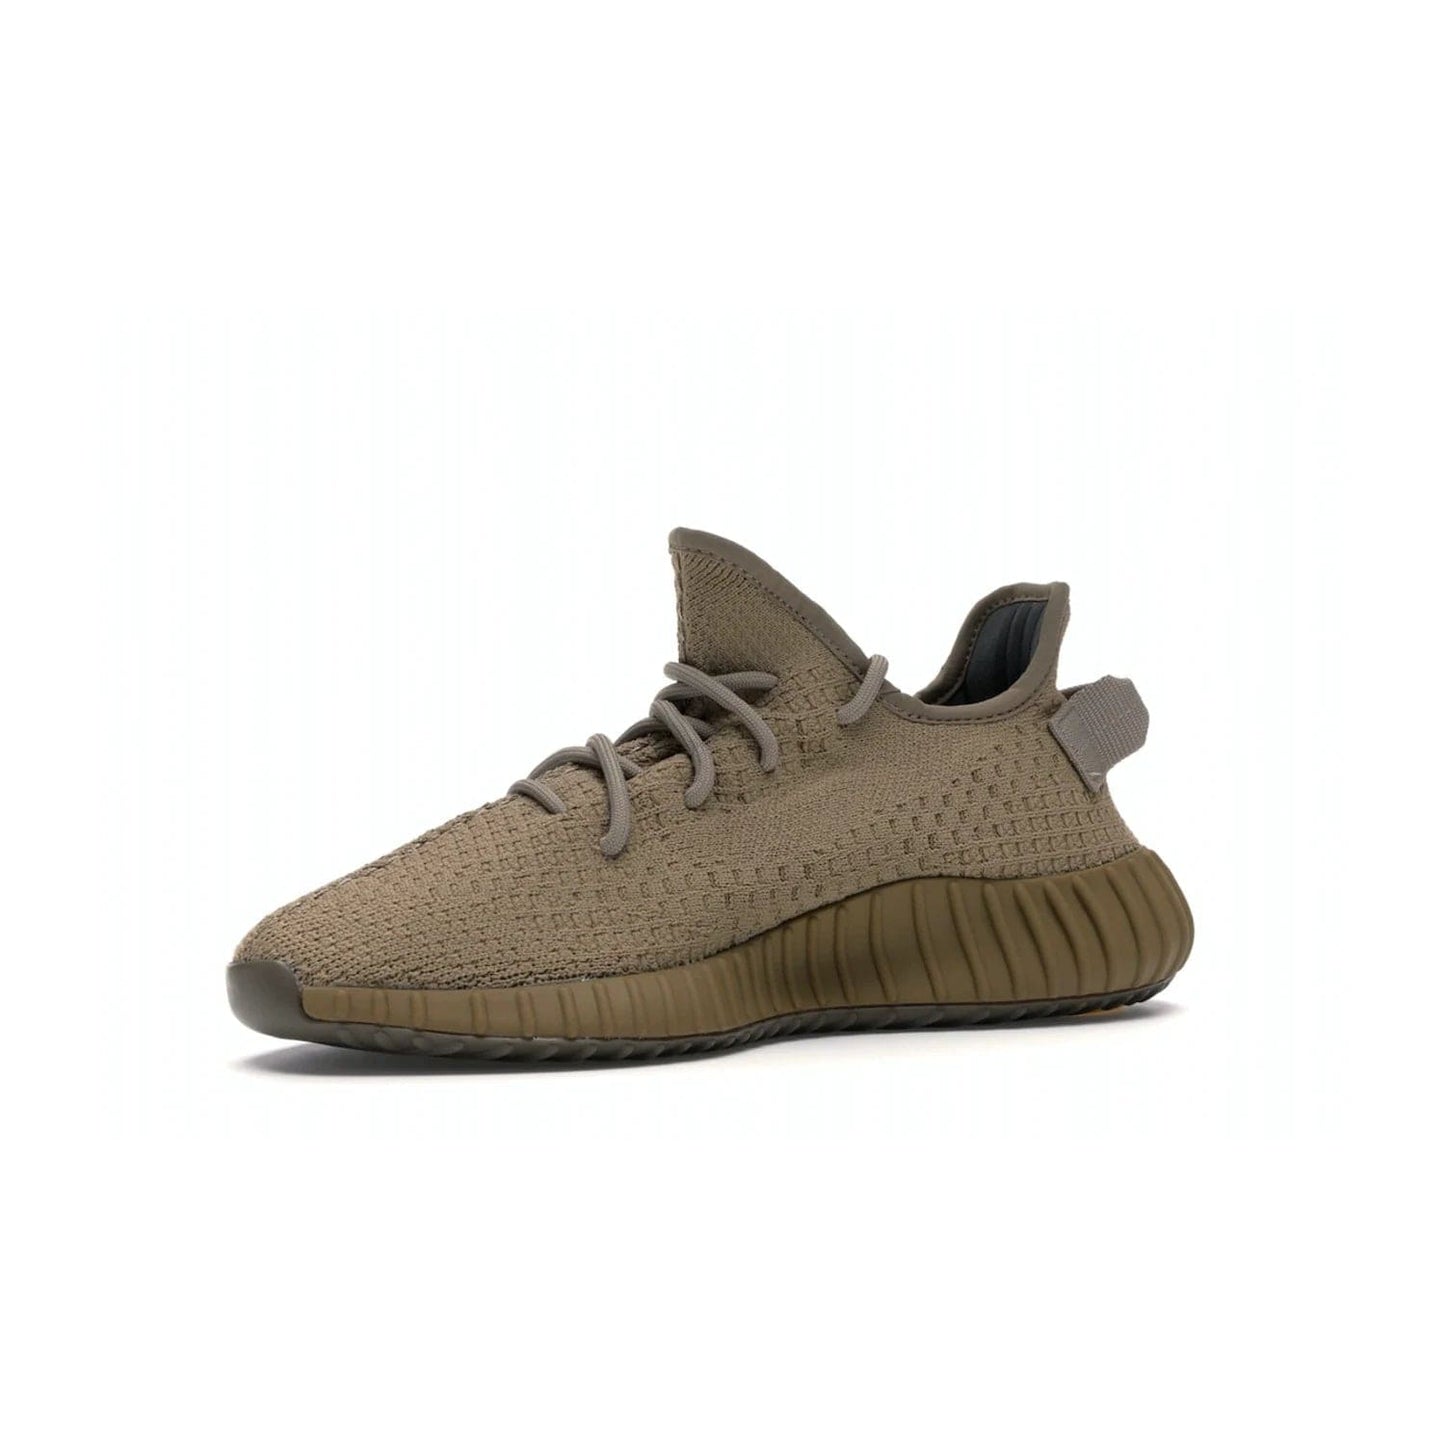 adidas Yeezy Boost 350 V2 Earth - Image 16 - Only at www.BallersClubKickz.com - Abstract style with the adidas Yeezy Boost 350 V2 Earth. Crafted with mud Primeknit upper, mud Boost and interior, and a translucent side stripe. Regional exclusive in Earth/Earth/Earth colorway, these fashionable sneakers released in February 2020. Showcase your style with the Yeezy 350 V2 Earth.